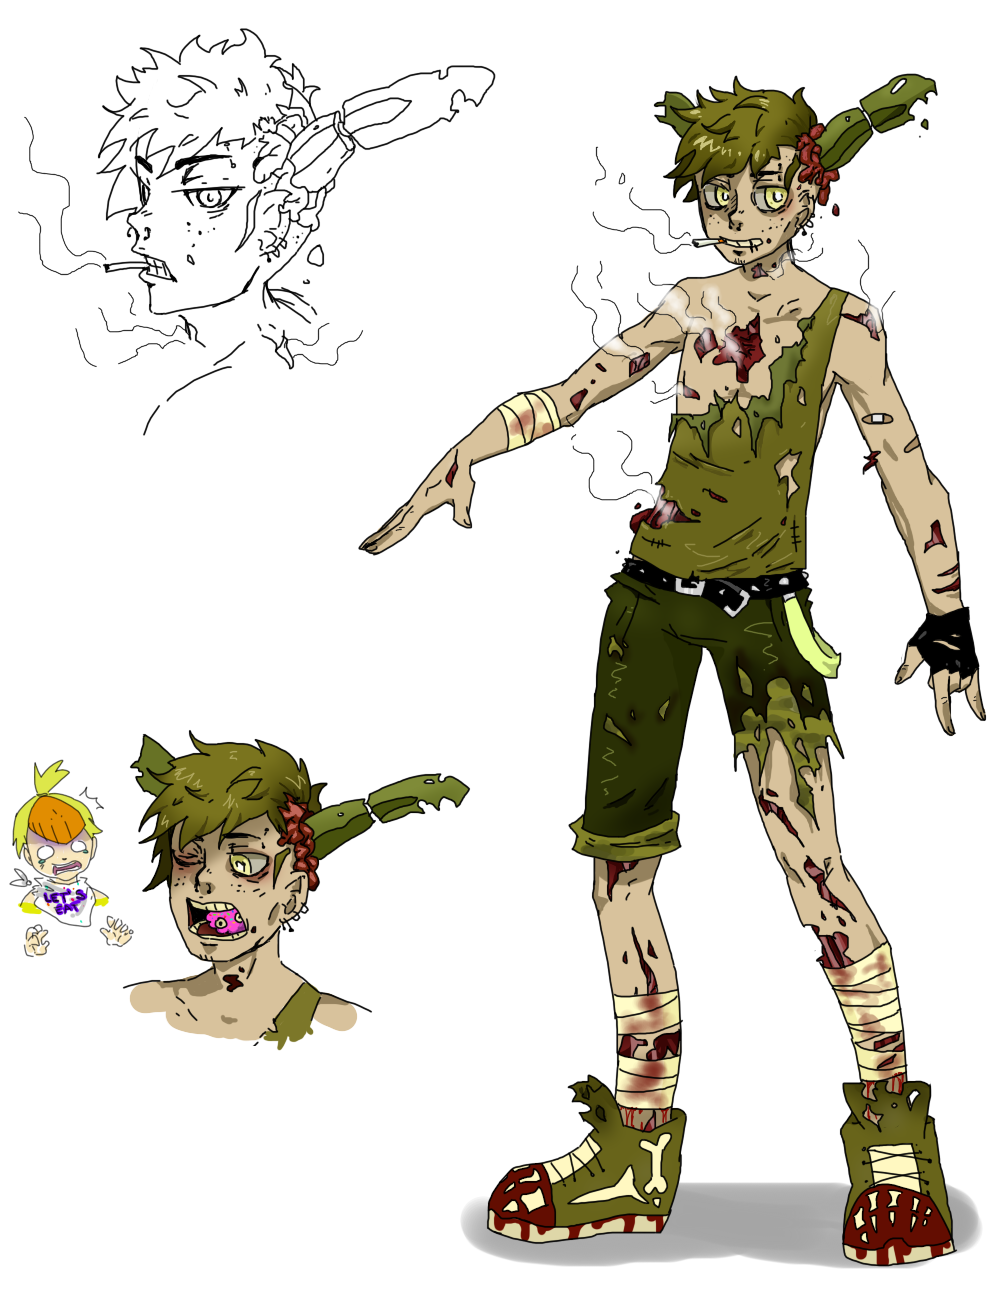 SPRINGTRAP (HUMAN/ANDROID/ANIME VERSION) by YaoiIsMyBet on DeviantArt